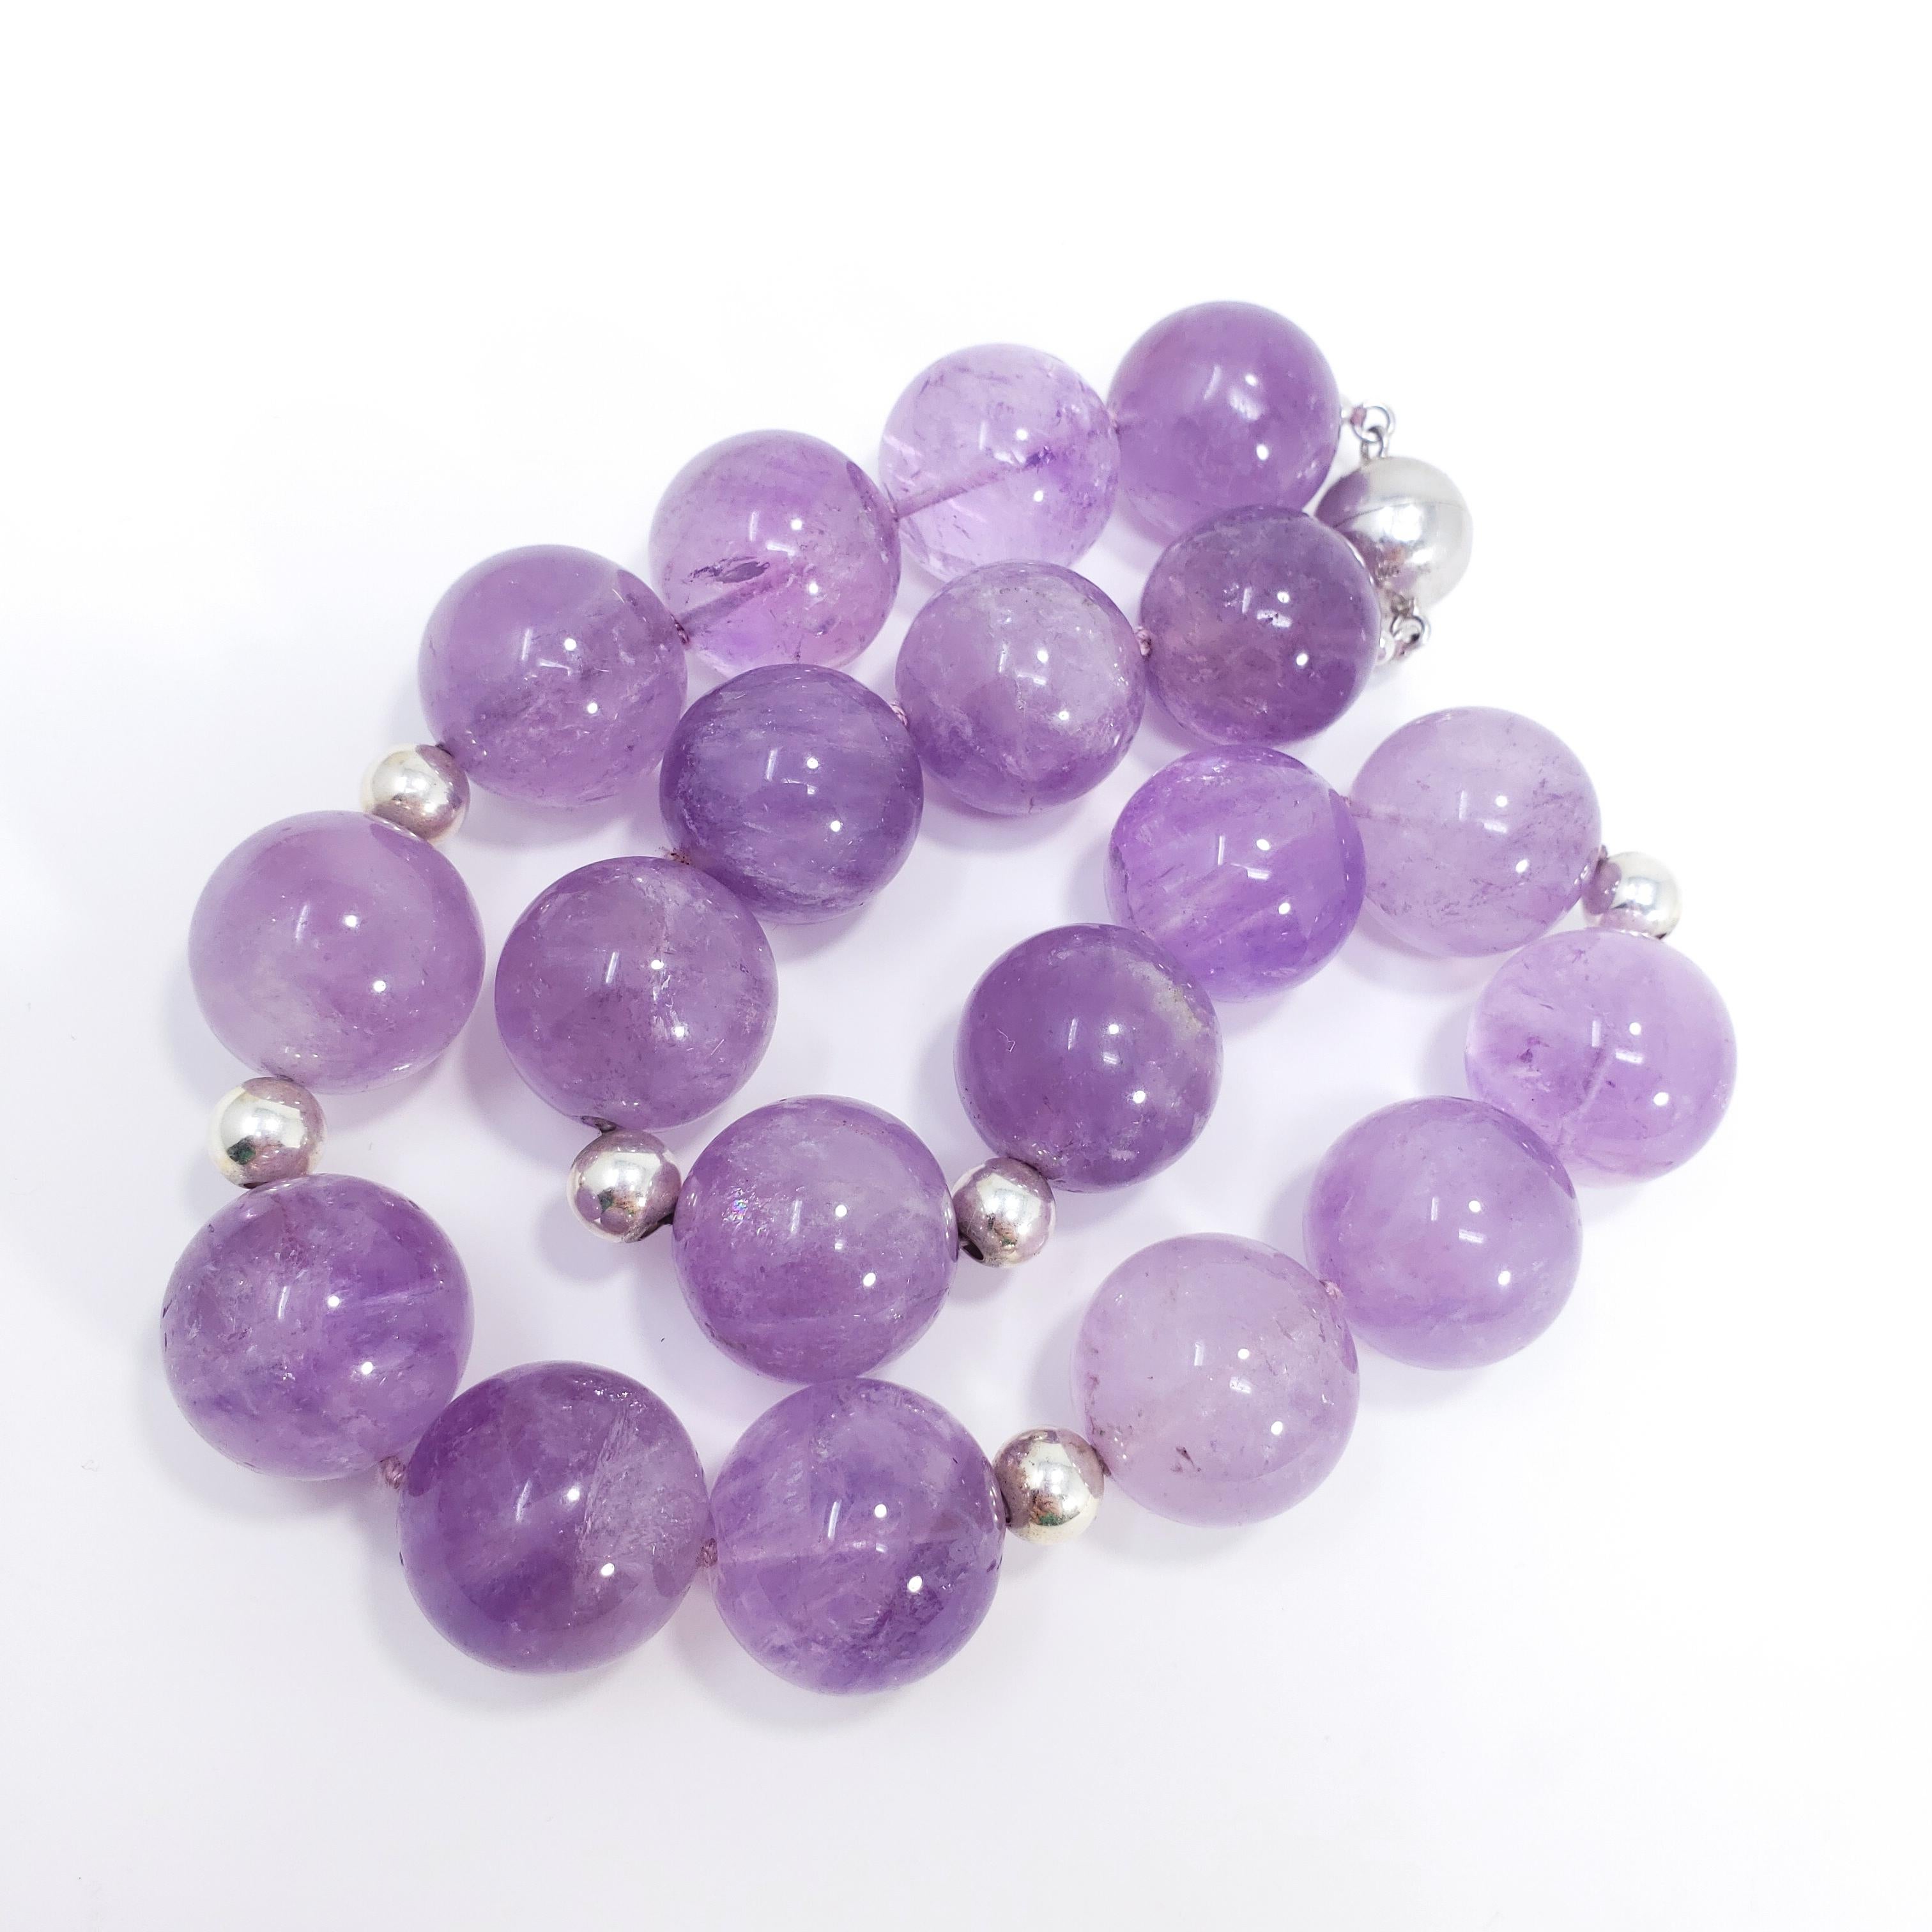 An elegant amethyst necklace! Features 20mm genuine amethyst beads on a violet-colored knotted string, accented with sterling silver 7.5mm beads. This princess-length necklace is fastened with a magnetic sterling silver ball clasp for a